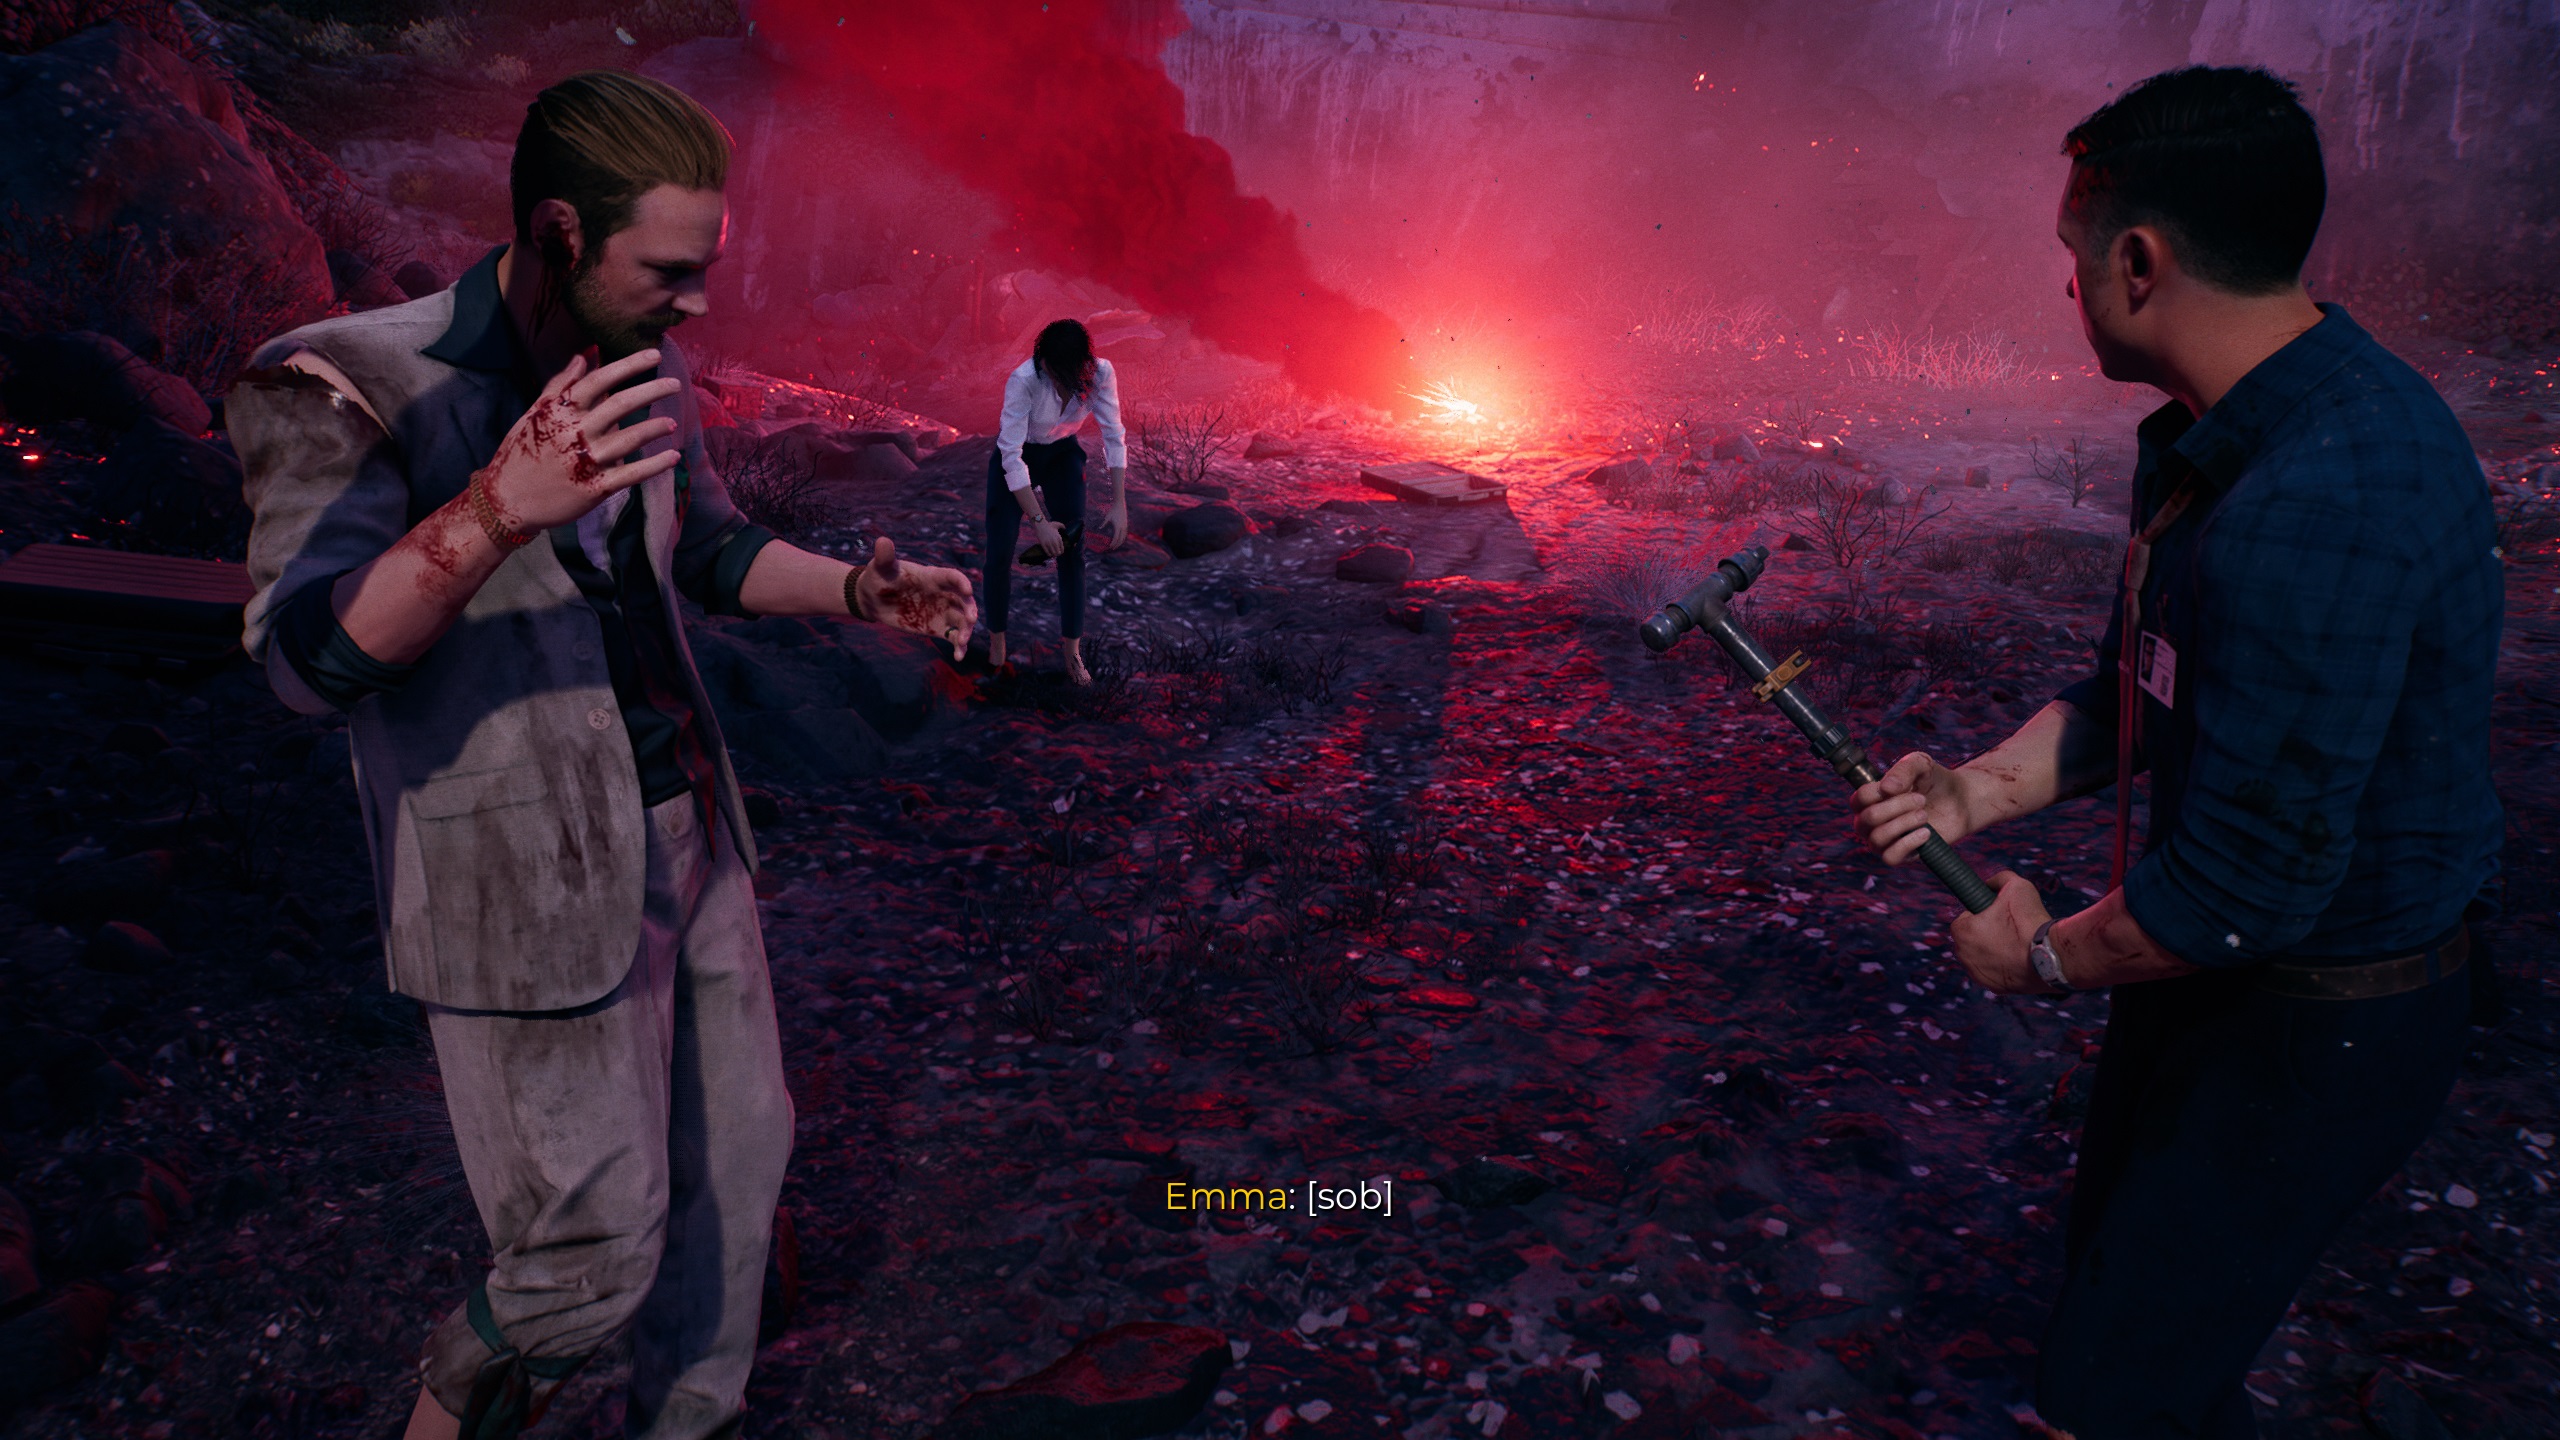 Dead Island 2 System Requirements: Can Your PC Run This Zombie